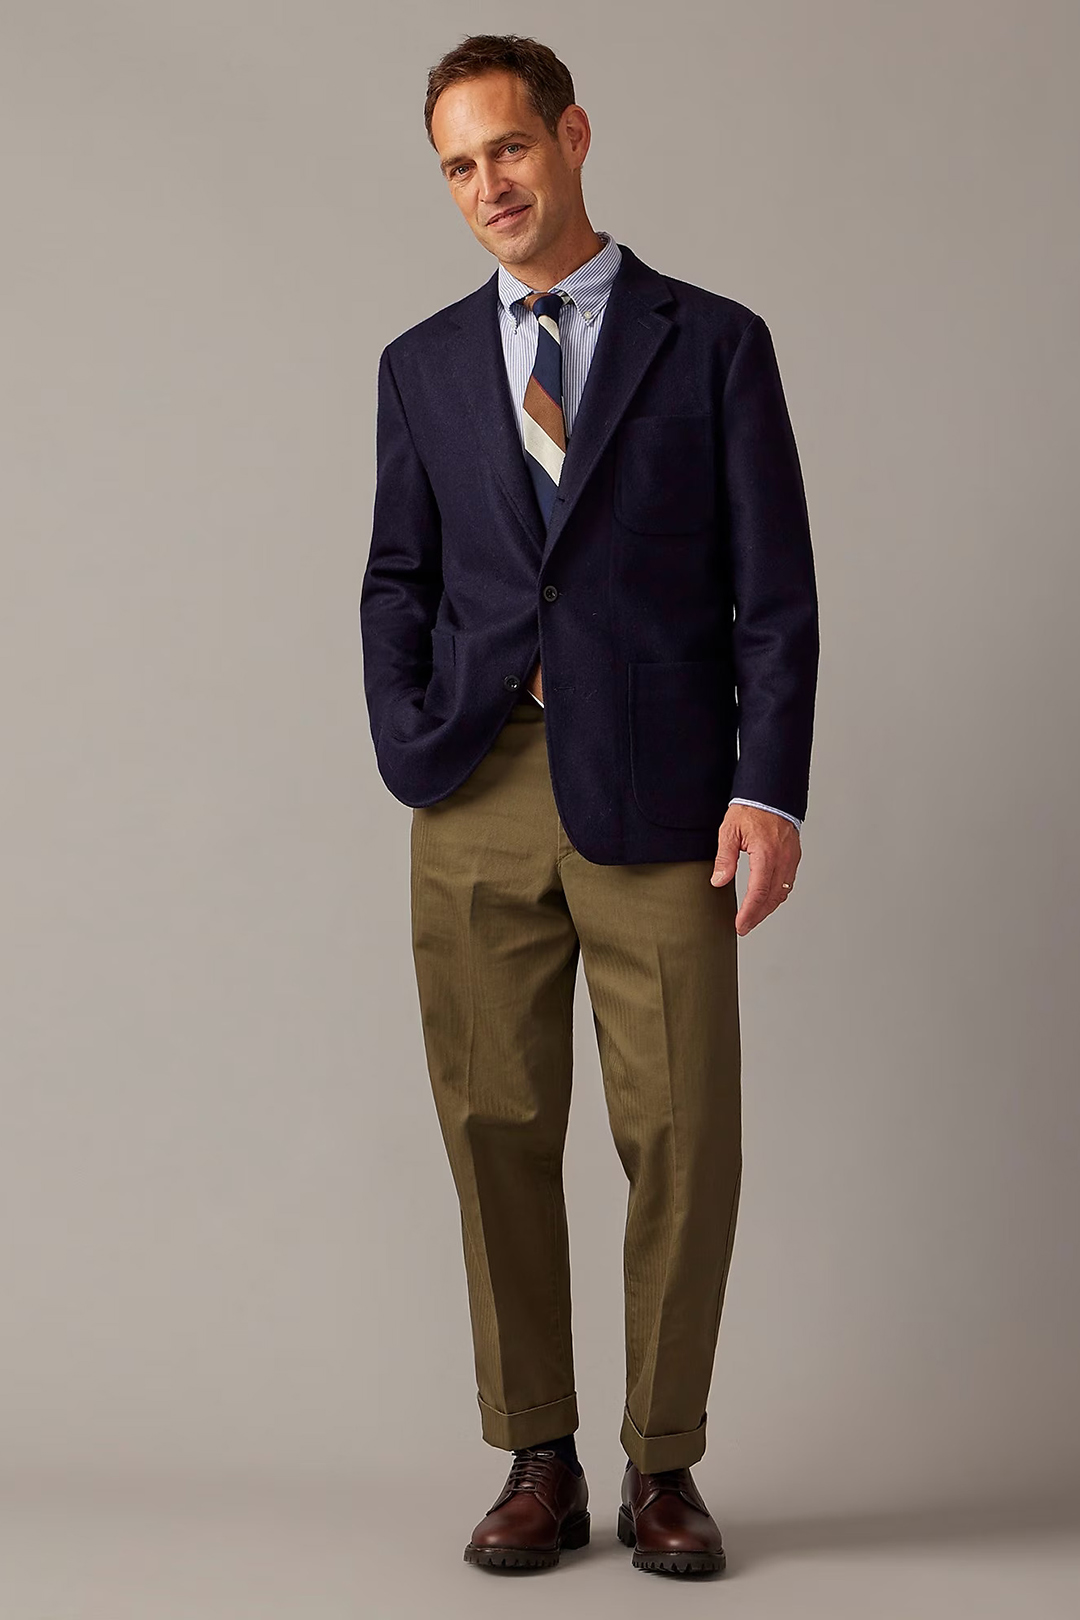 Navy suit jacket, blue striped button-down shirt, multi-color tie, green chinos, and dark brown derby shoes outfit